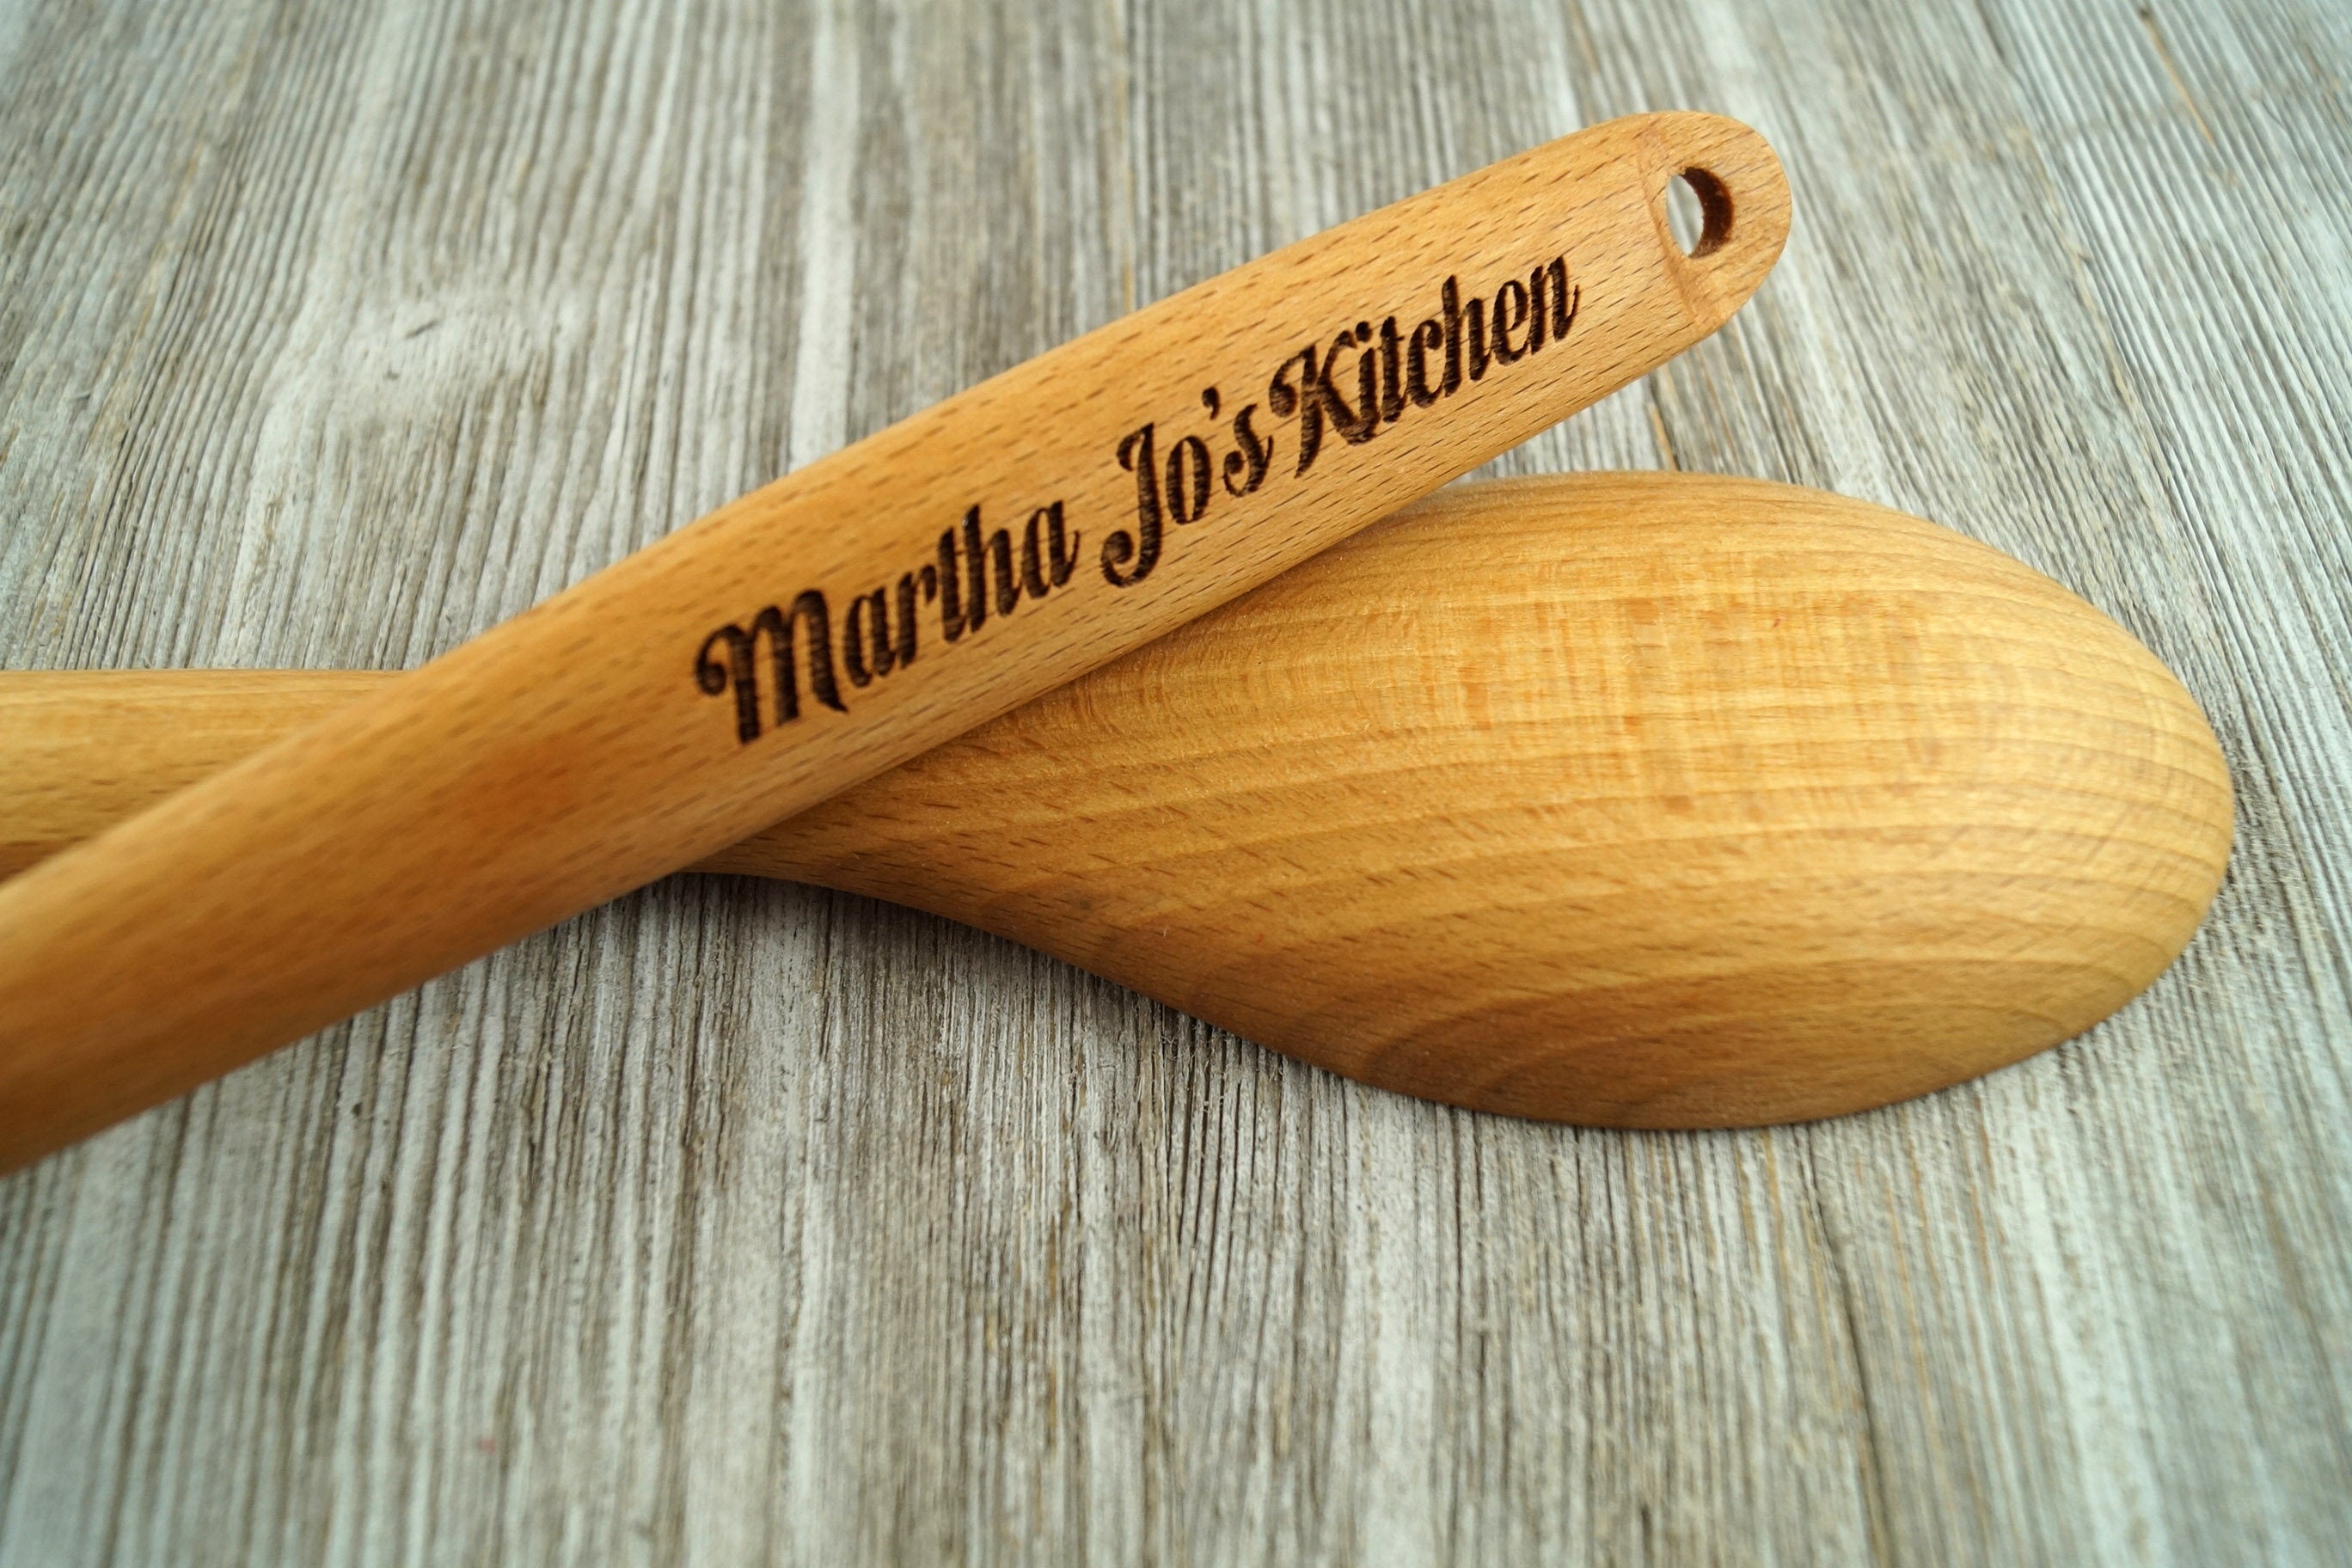  Personalized Christmas Gifts for Mom From Daughter Son - Mom  Birthday Gifts Women Mother's Day Gifts - Wooden Cooking Spoons with Funny  Apron Kitchen Cooking Gift Set: Home & Kitchen